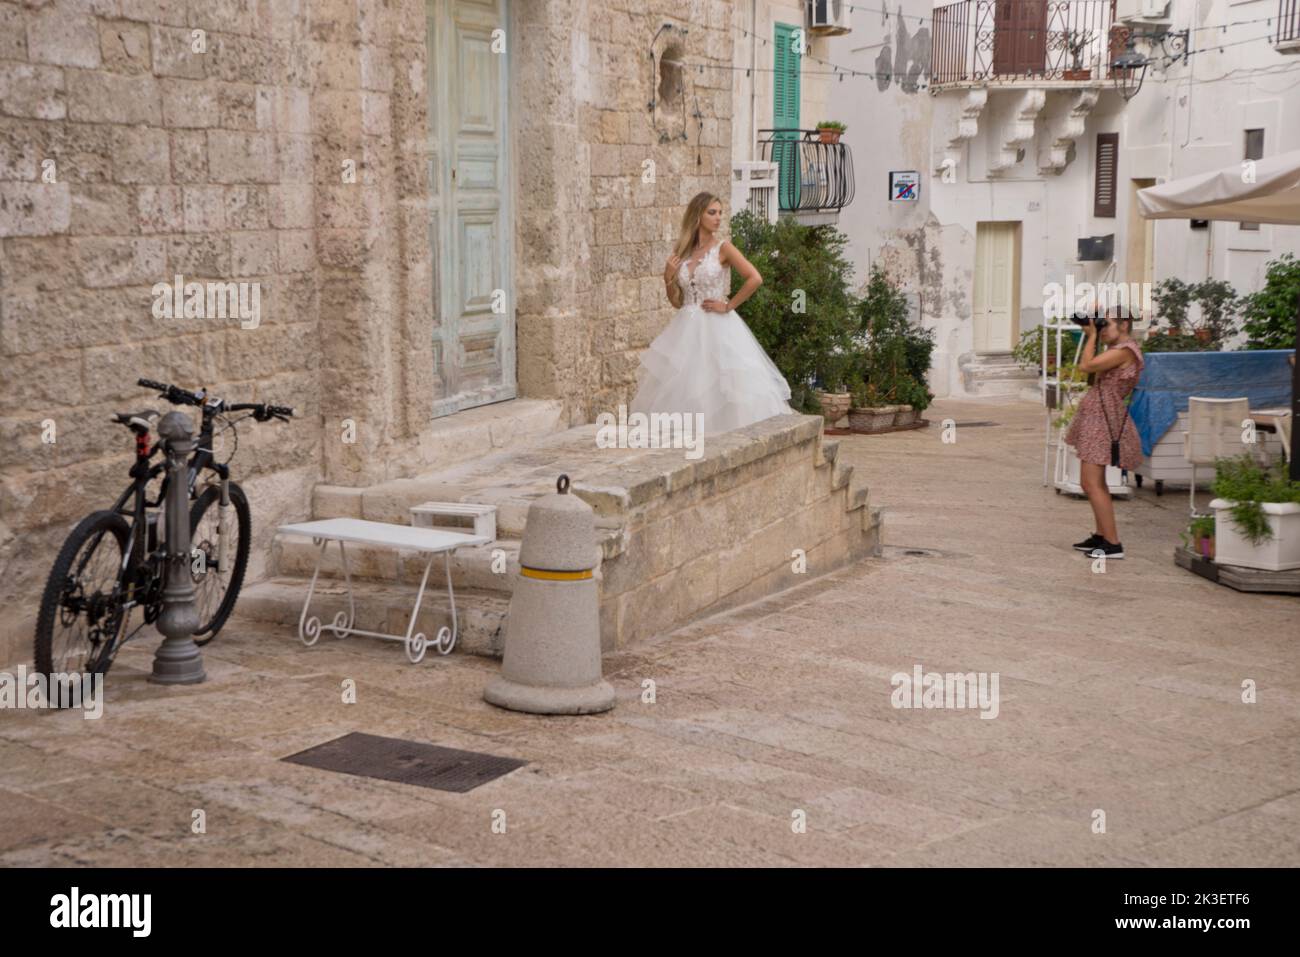 Views of harbour and old town of Monopoli, Puglia,Italy Stock Photo